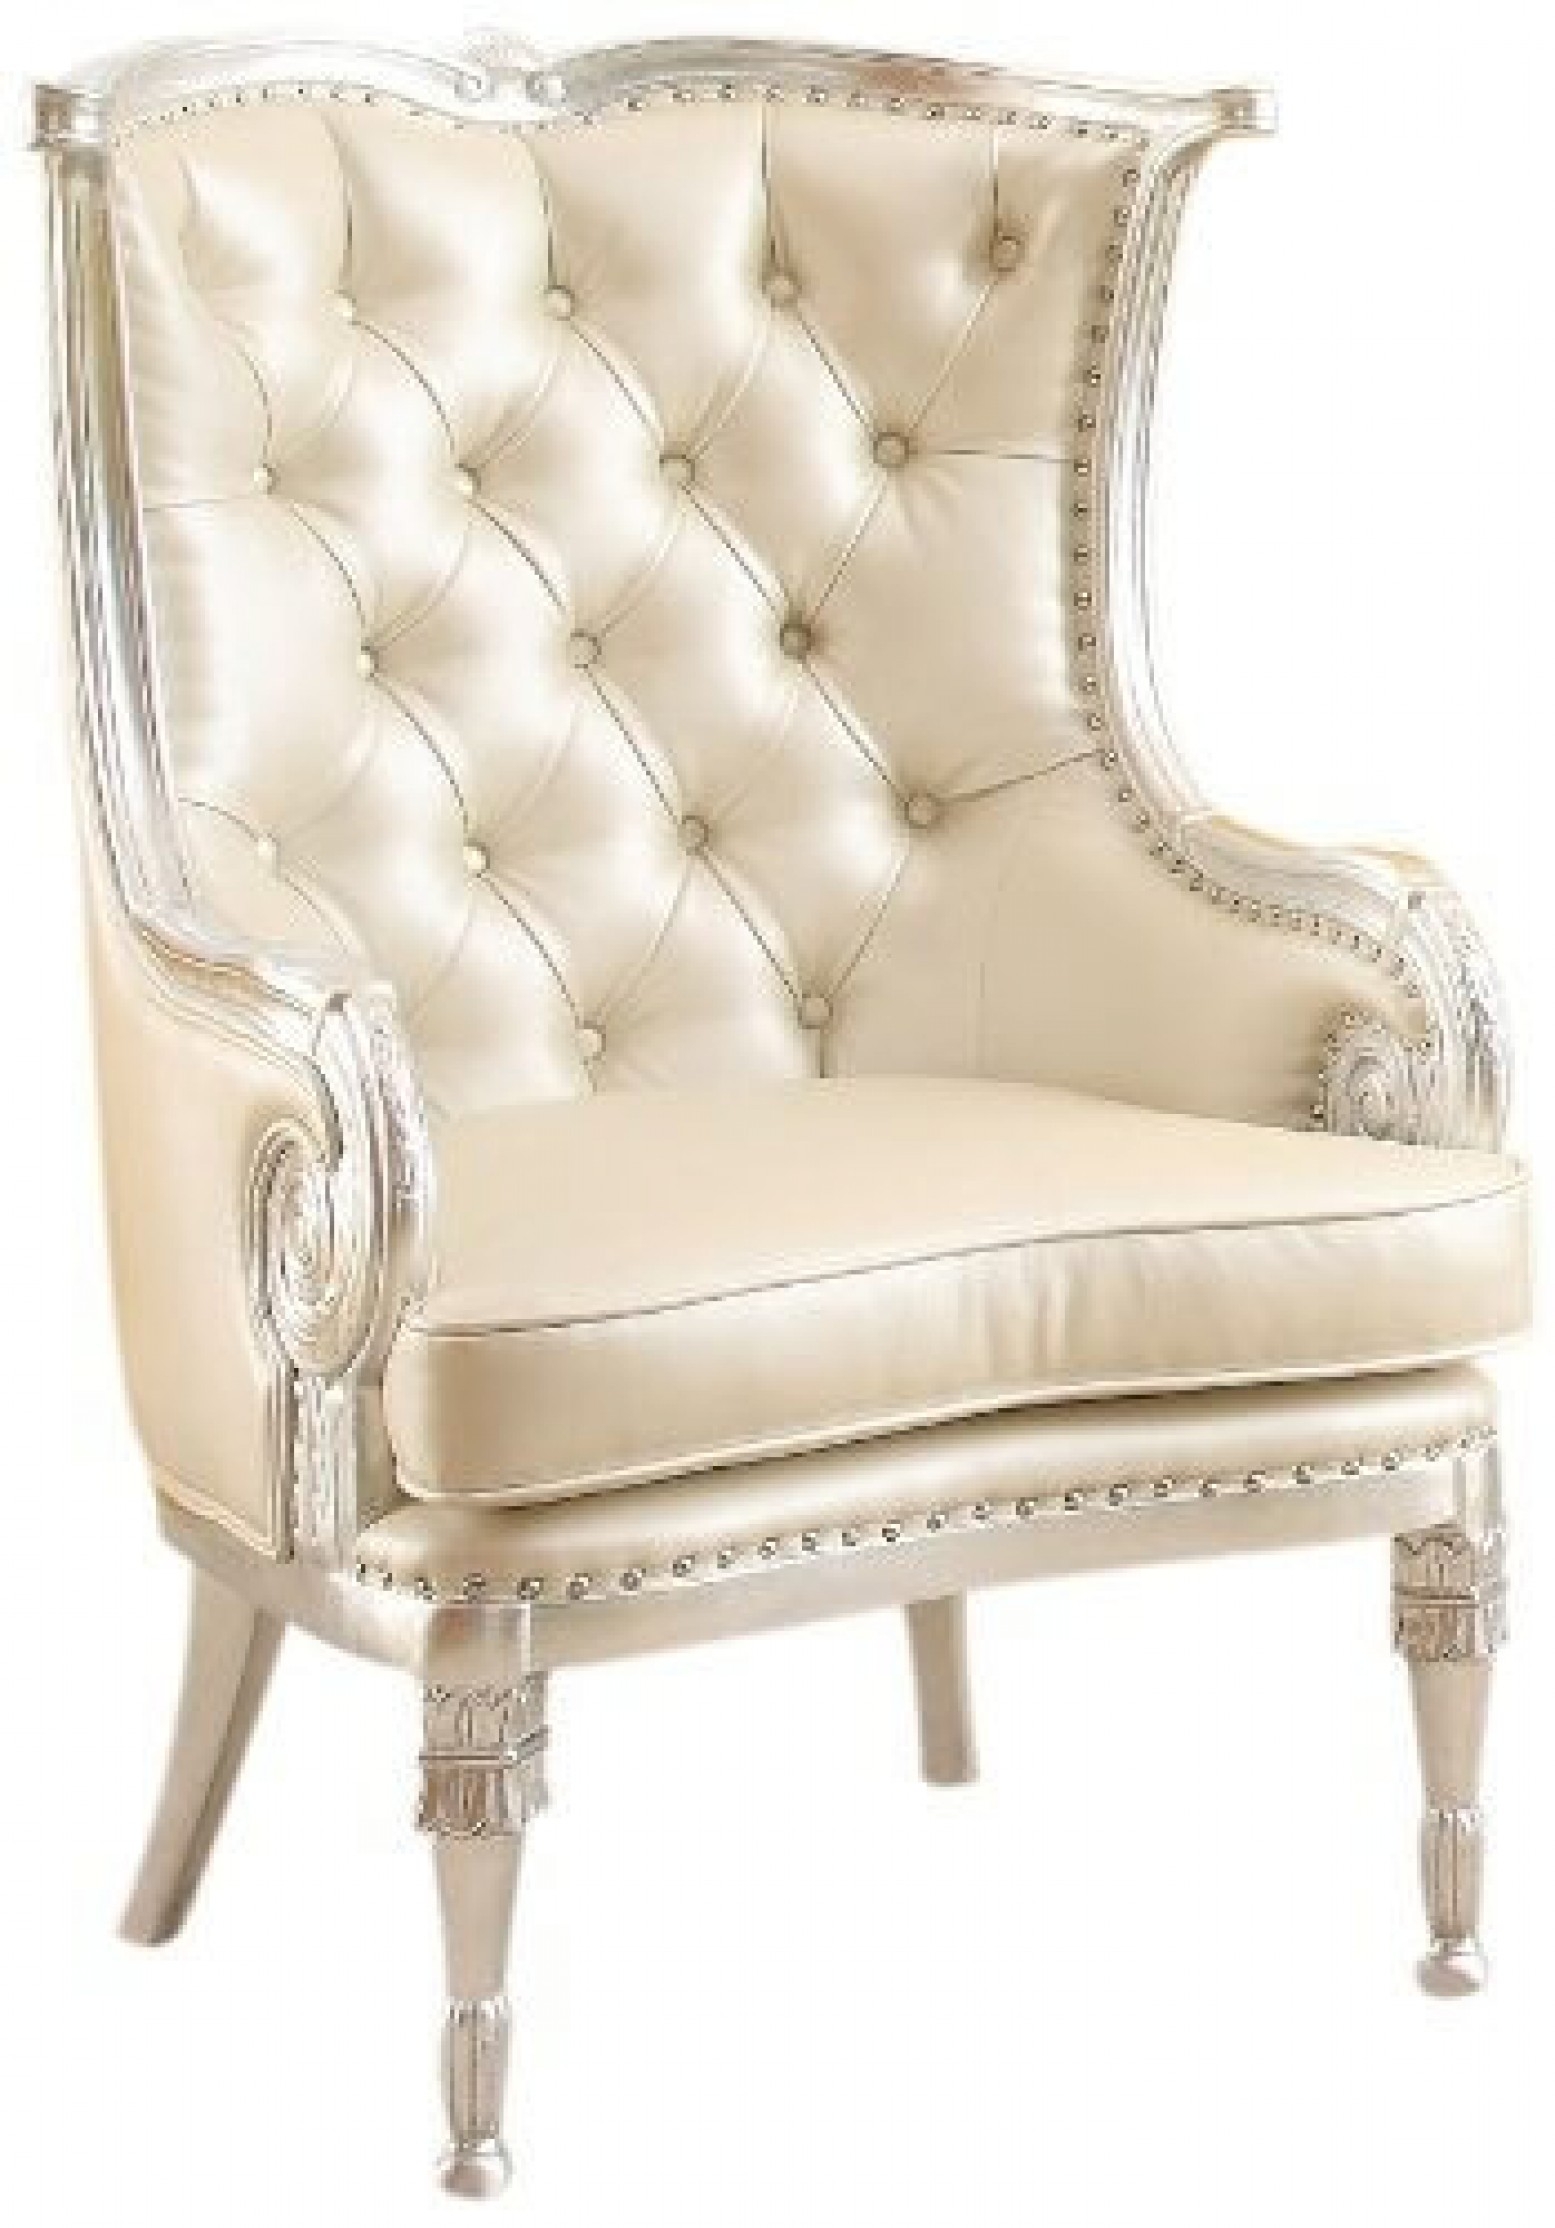 ACME 59122 Pawnee Accent Chair, Silver Frame and Beige Finish